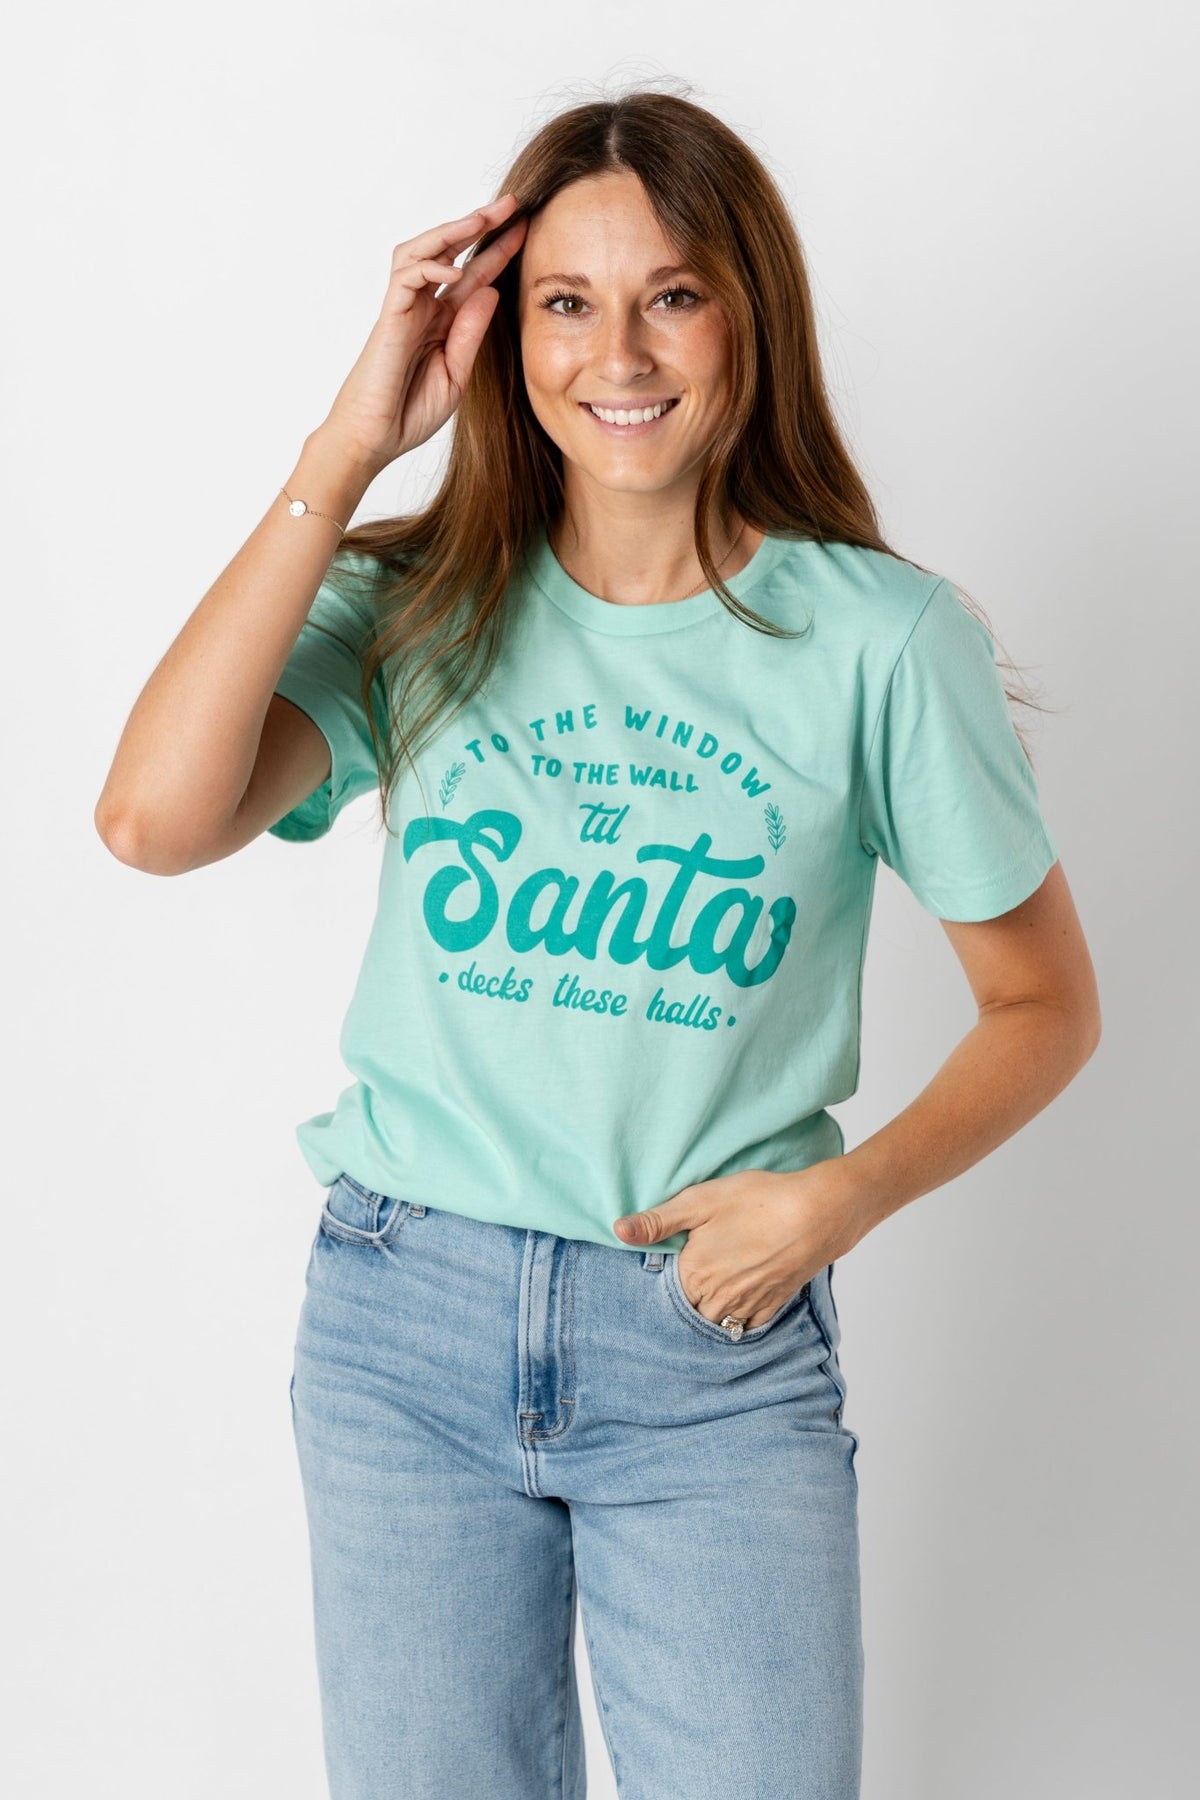 To the windows to the walls t-shirt mint - Trendy Holiday Apparel at Lush Fashion Lounge Boutique in Oklahoma City